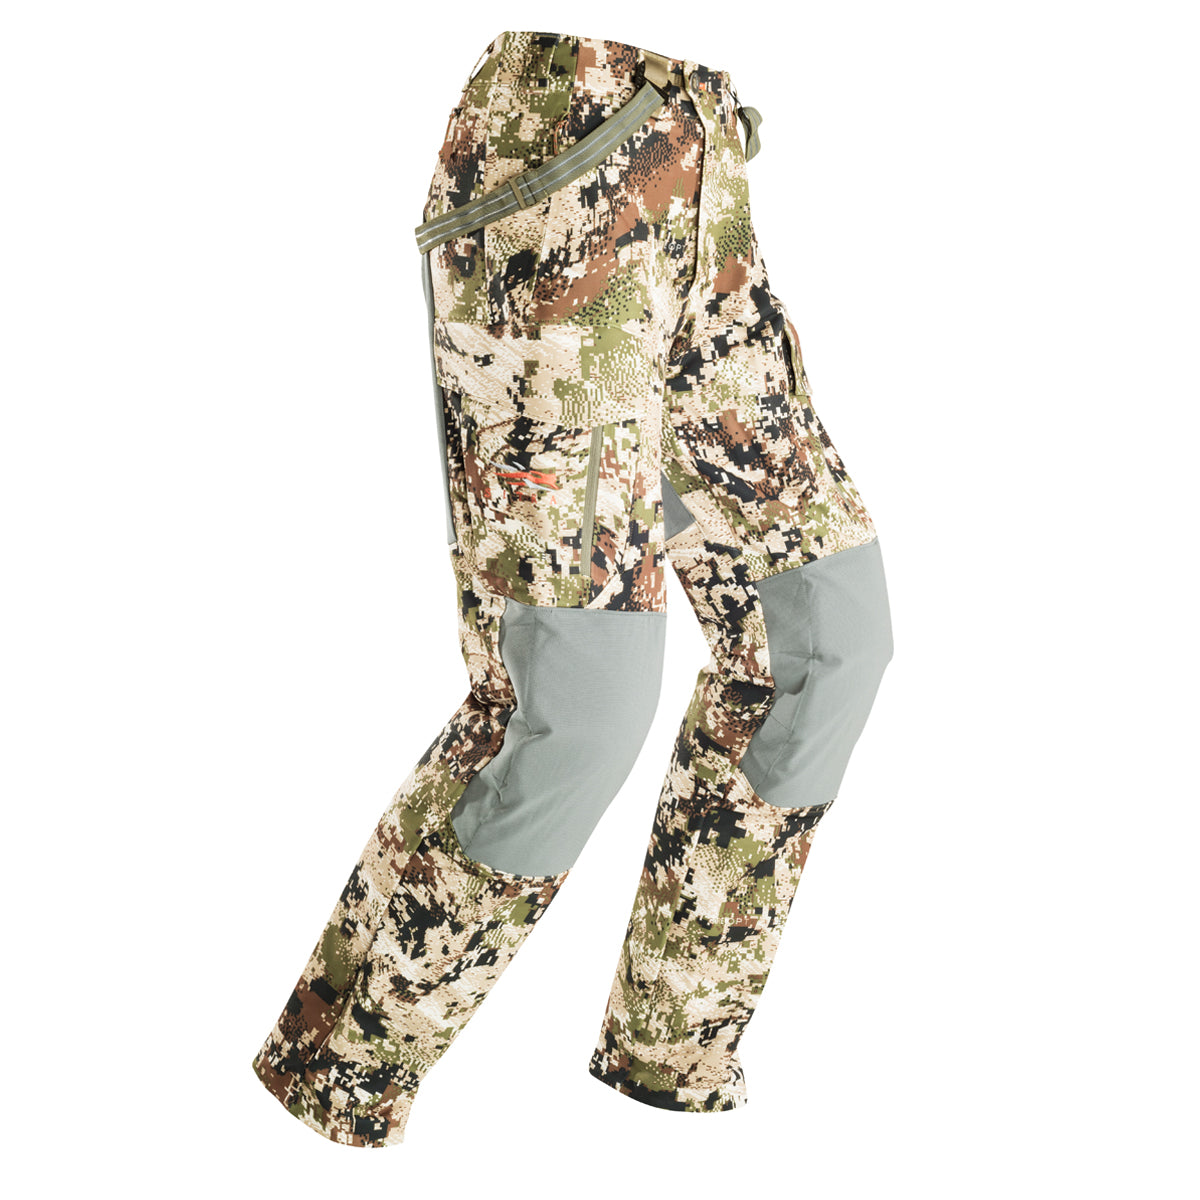 Sitka Timberline Pant by Sitka | Apparel - goHUNT Shop